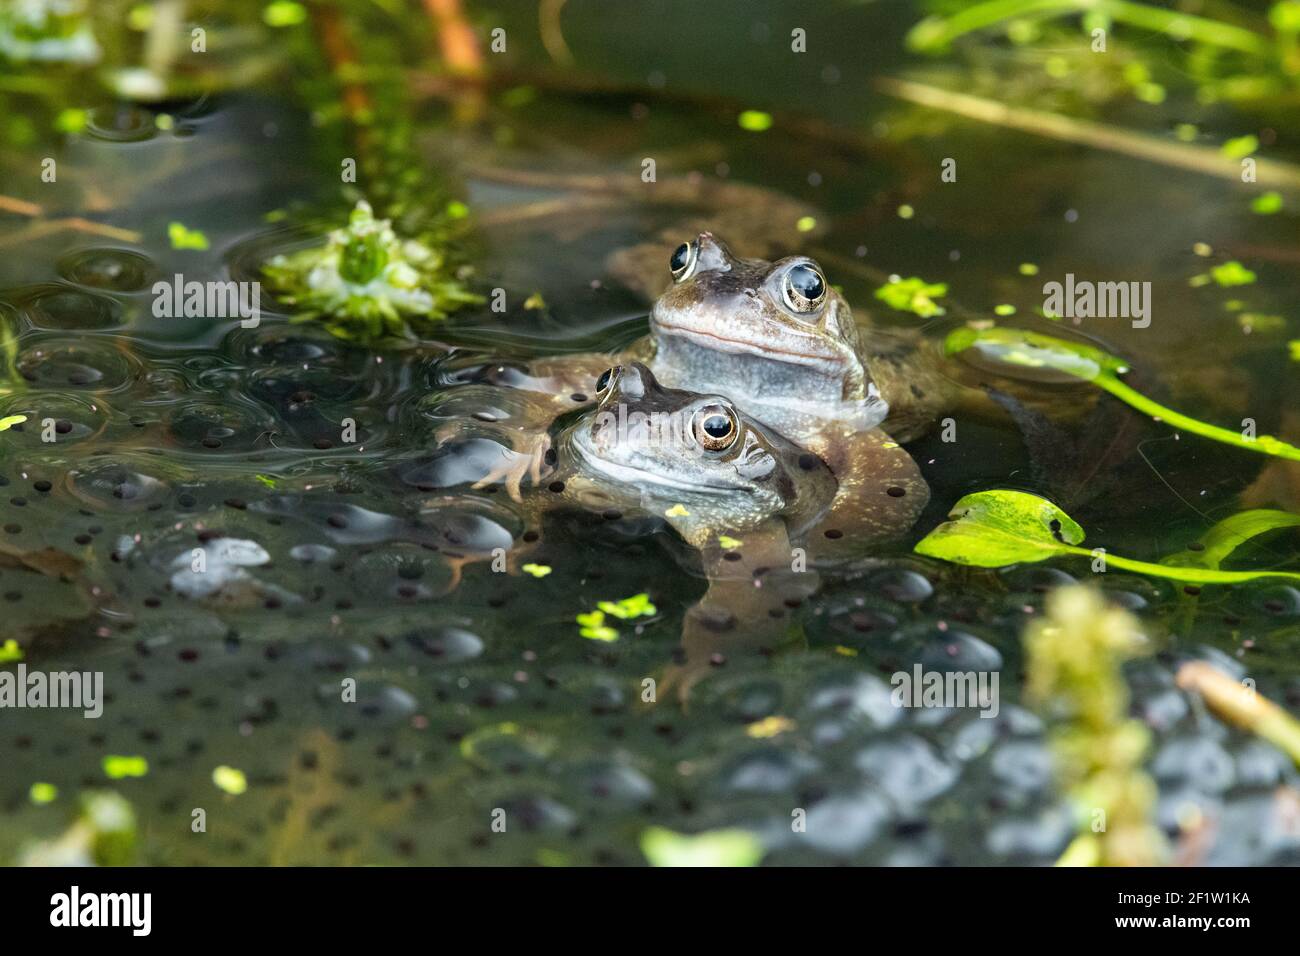 Common frogs (Rana temporaria) mating in spring surrounded by frogspawn, garden wildlife pond, Scotland, UK Stock Photo